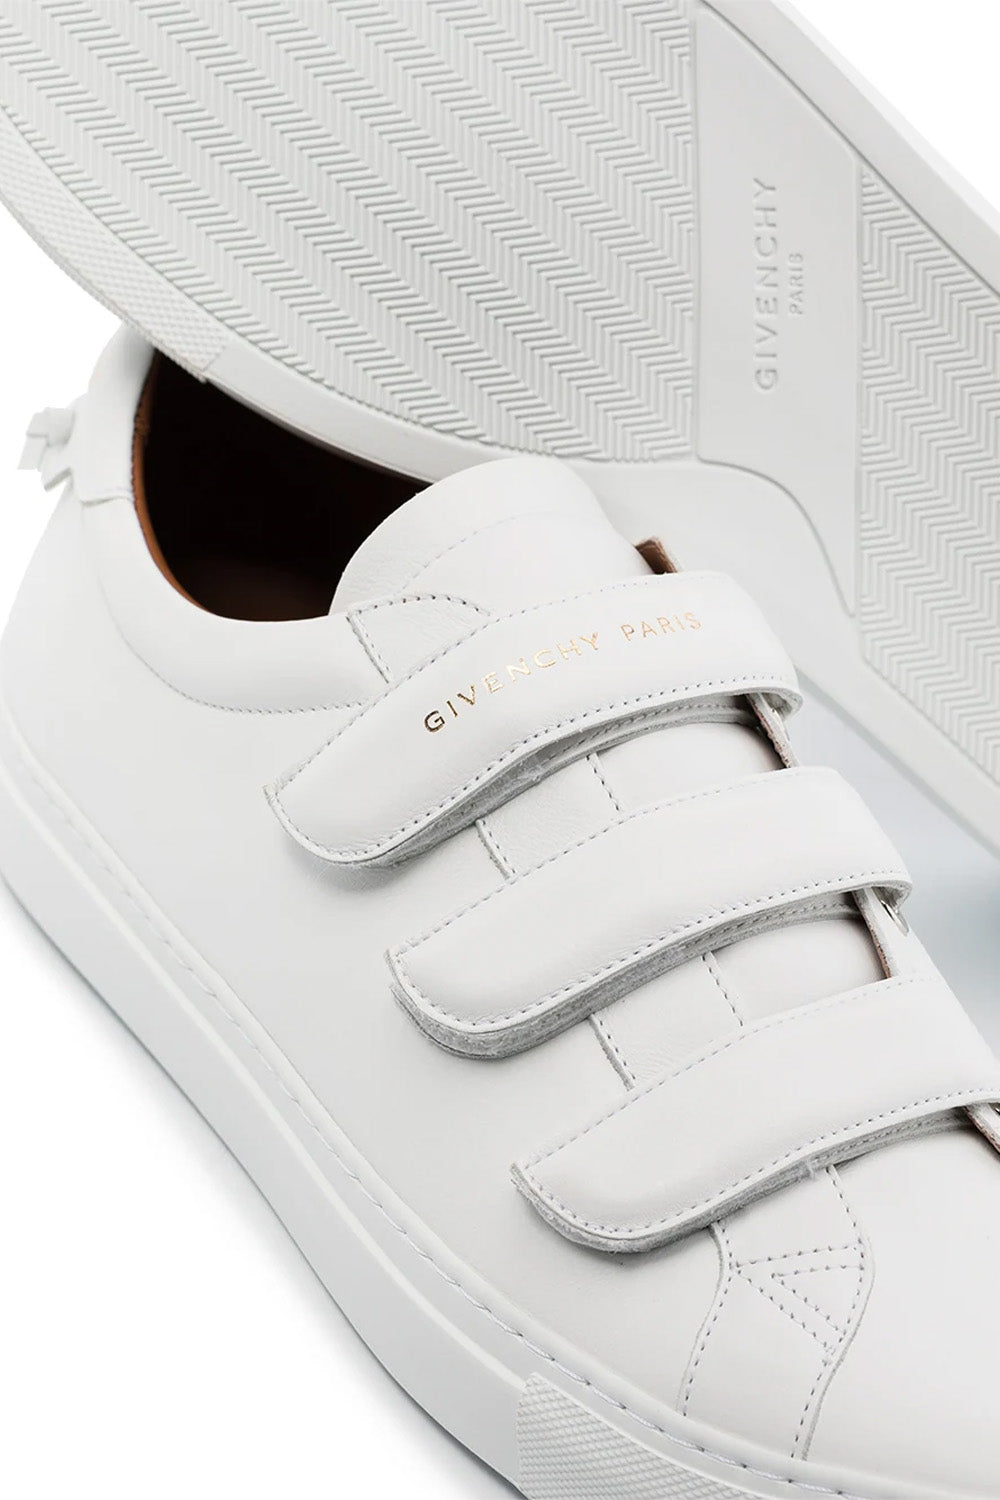 Givenchy Urban Street velcro strap sneakers